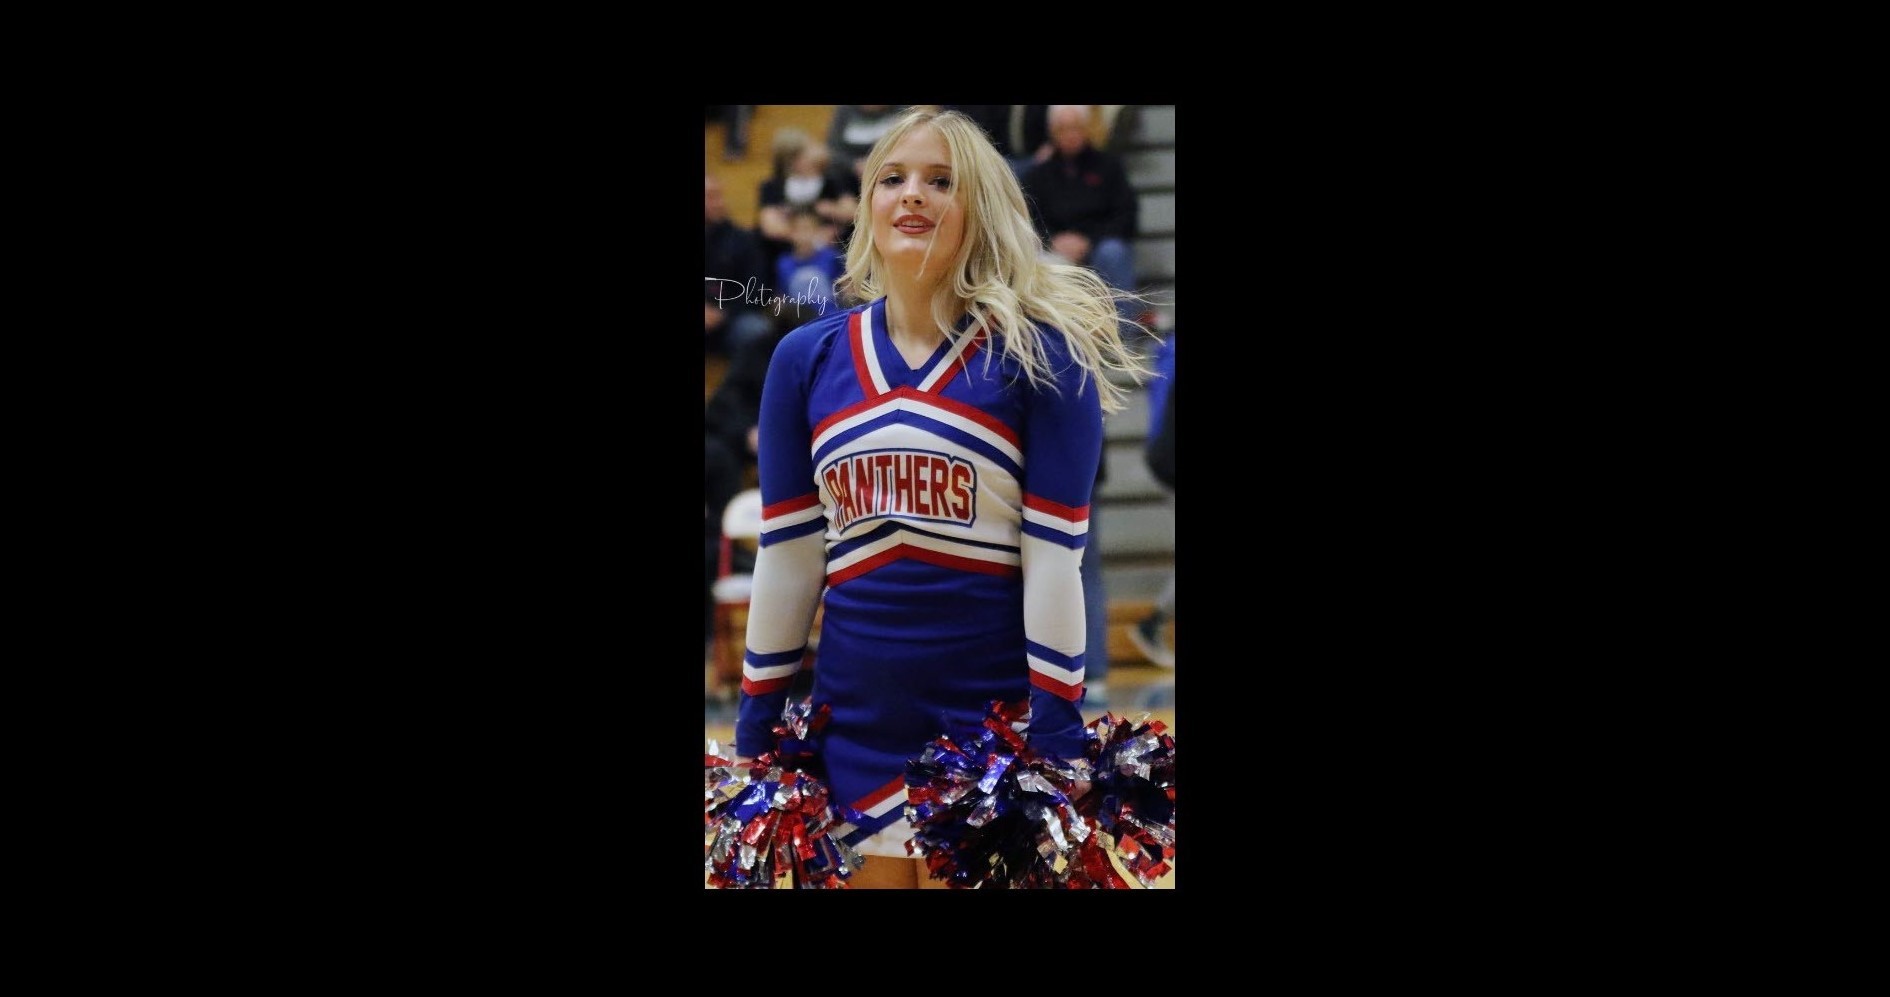 Cheerleader with red white and blue panthers uniform on